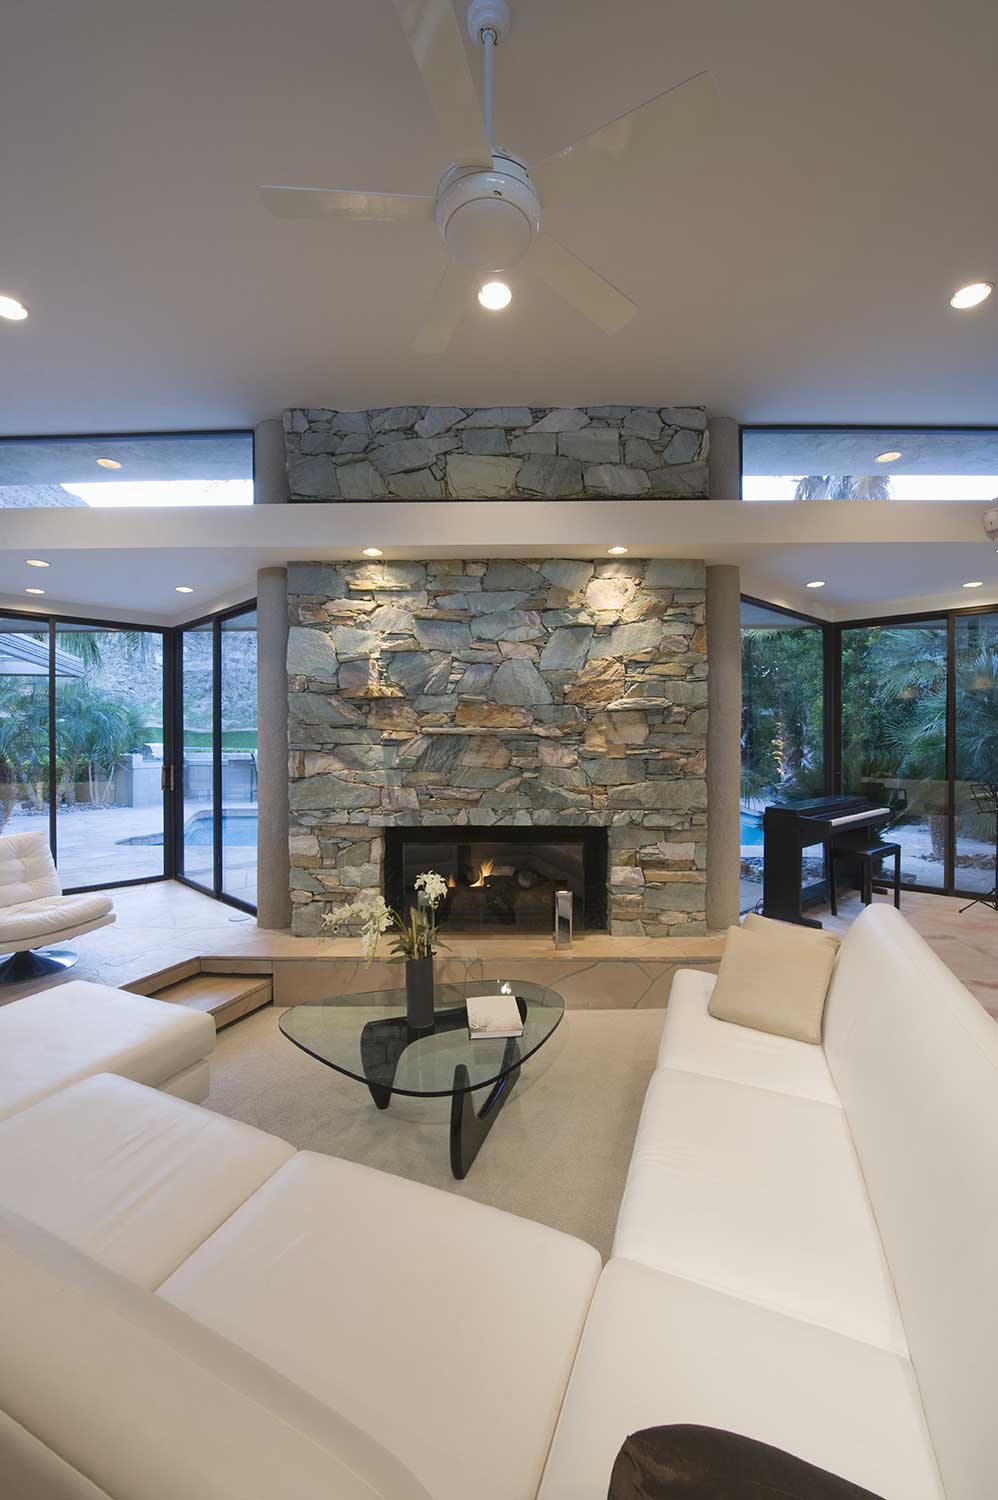 Seating area with white corner sofa, glass table and fireplace